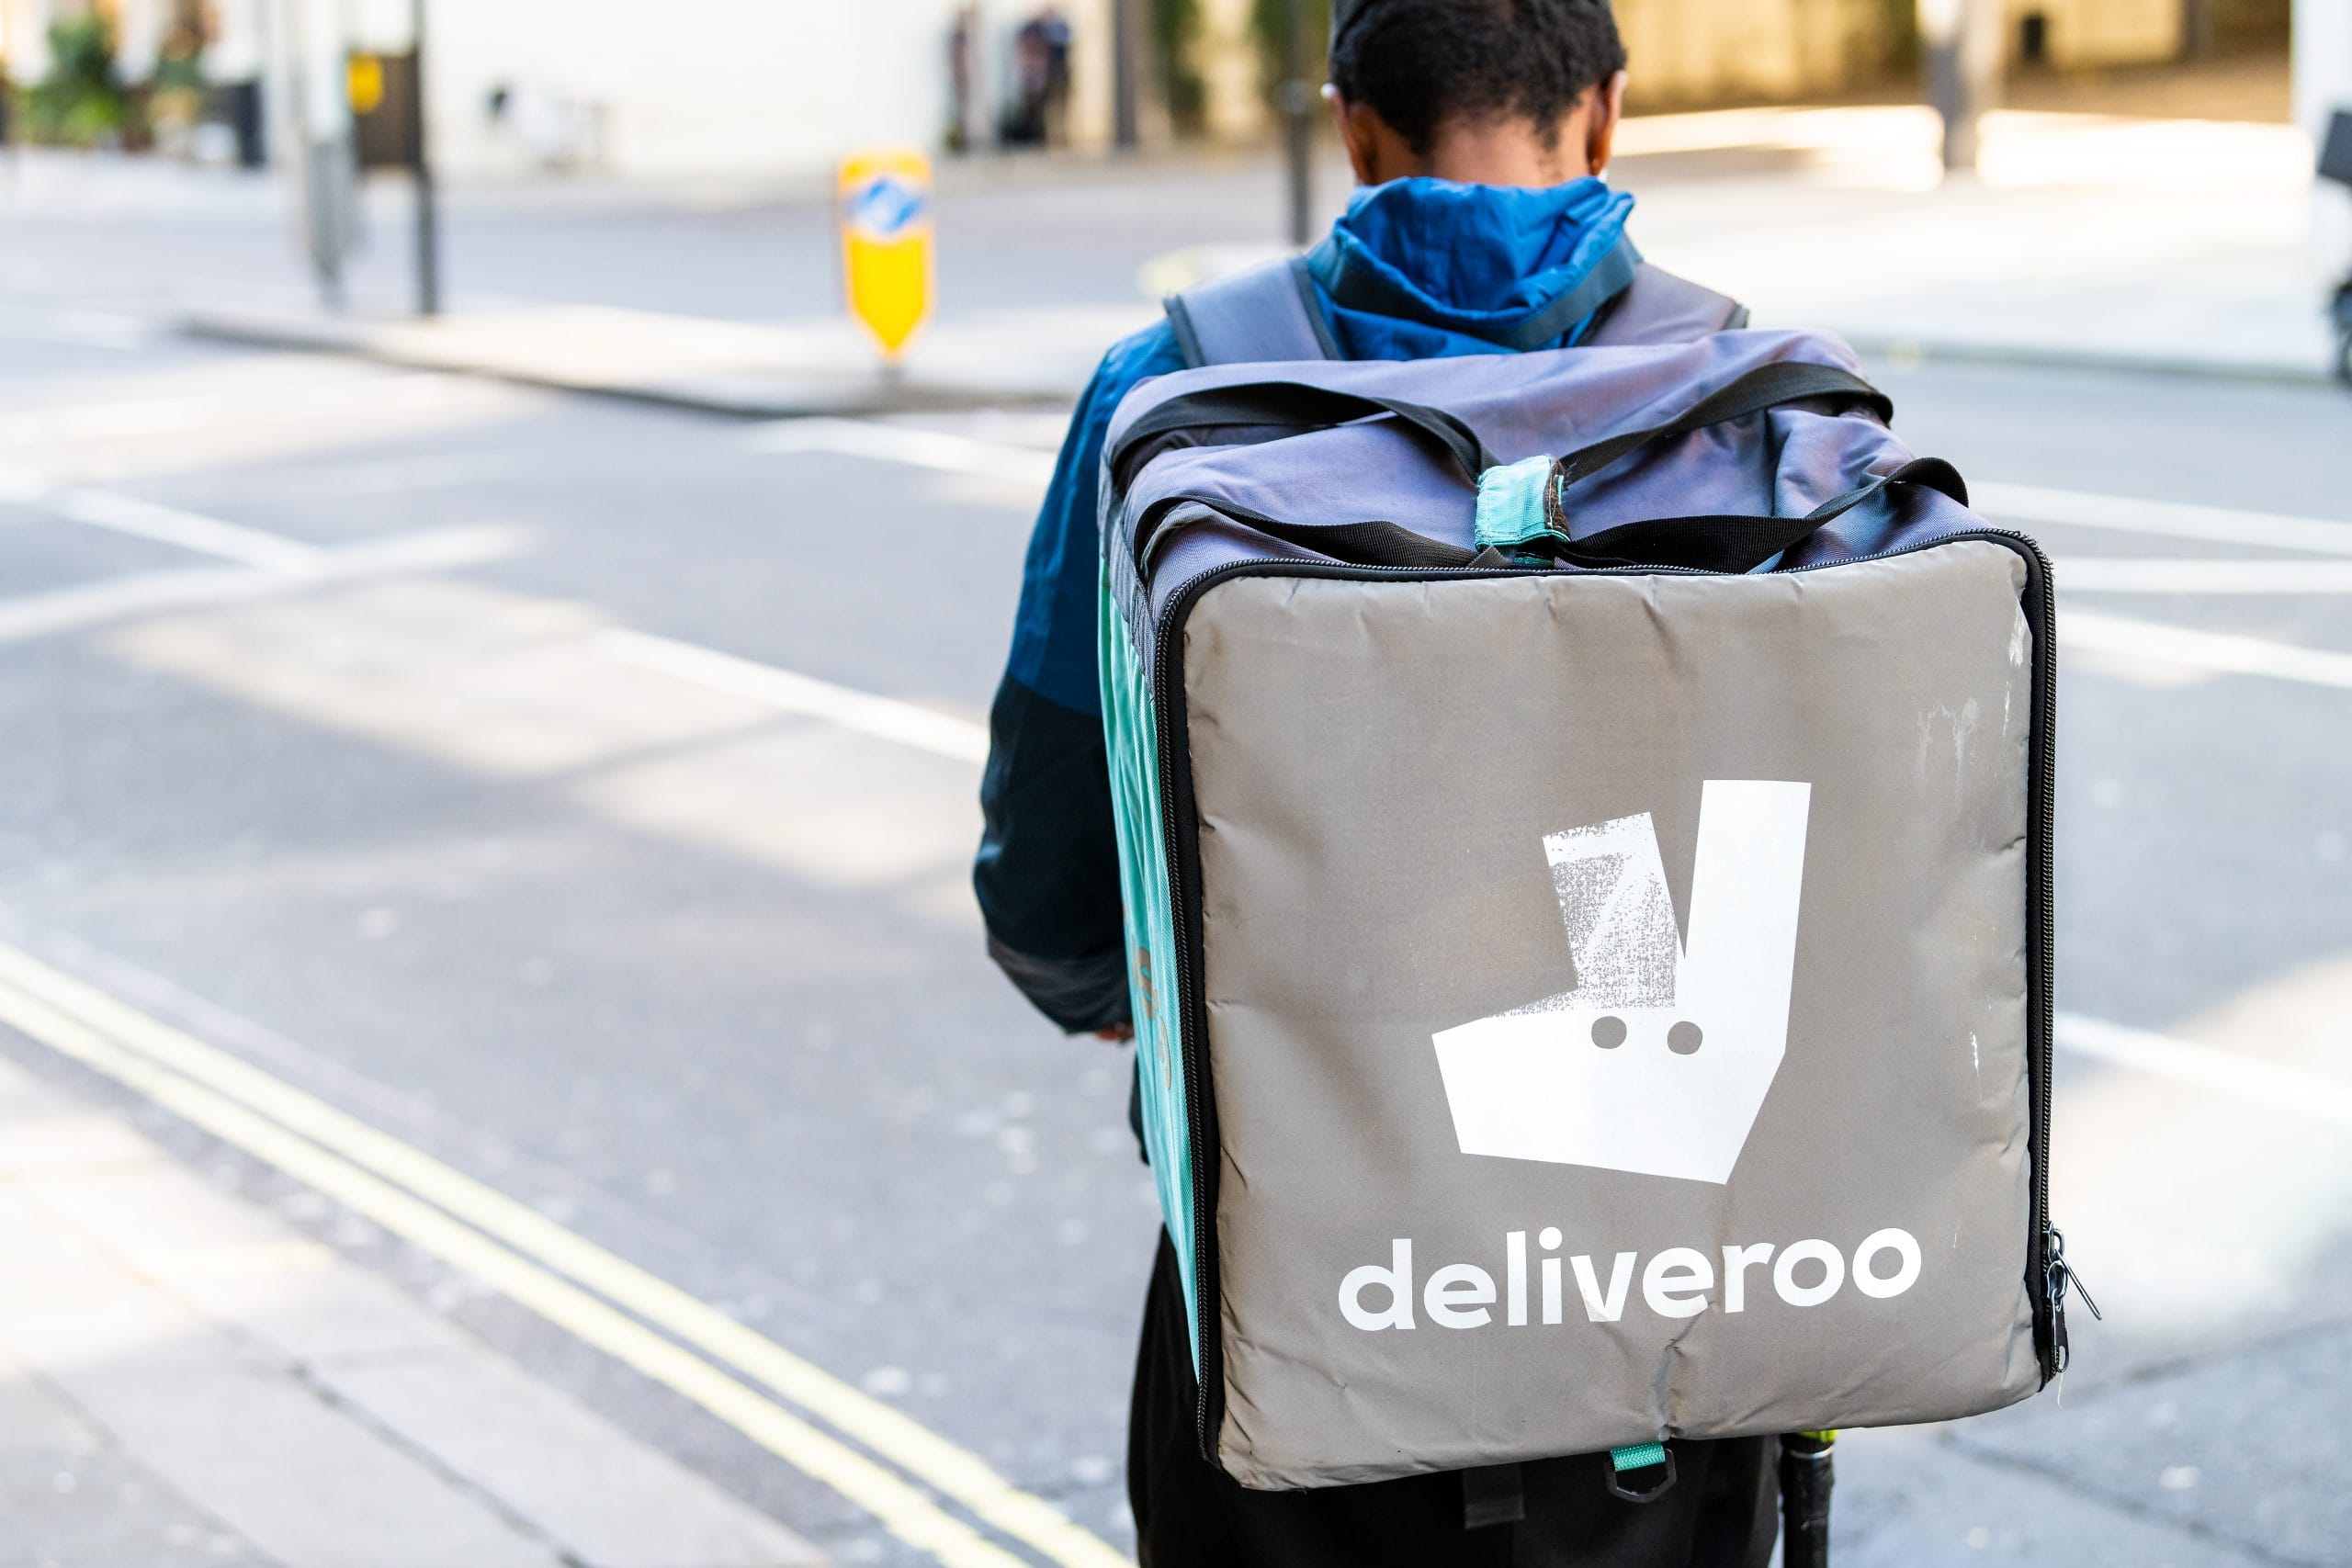 Deliveroo: A man with a deliveroo bag on his bag